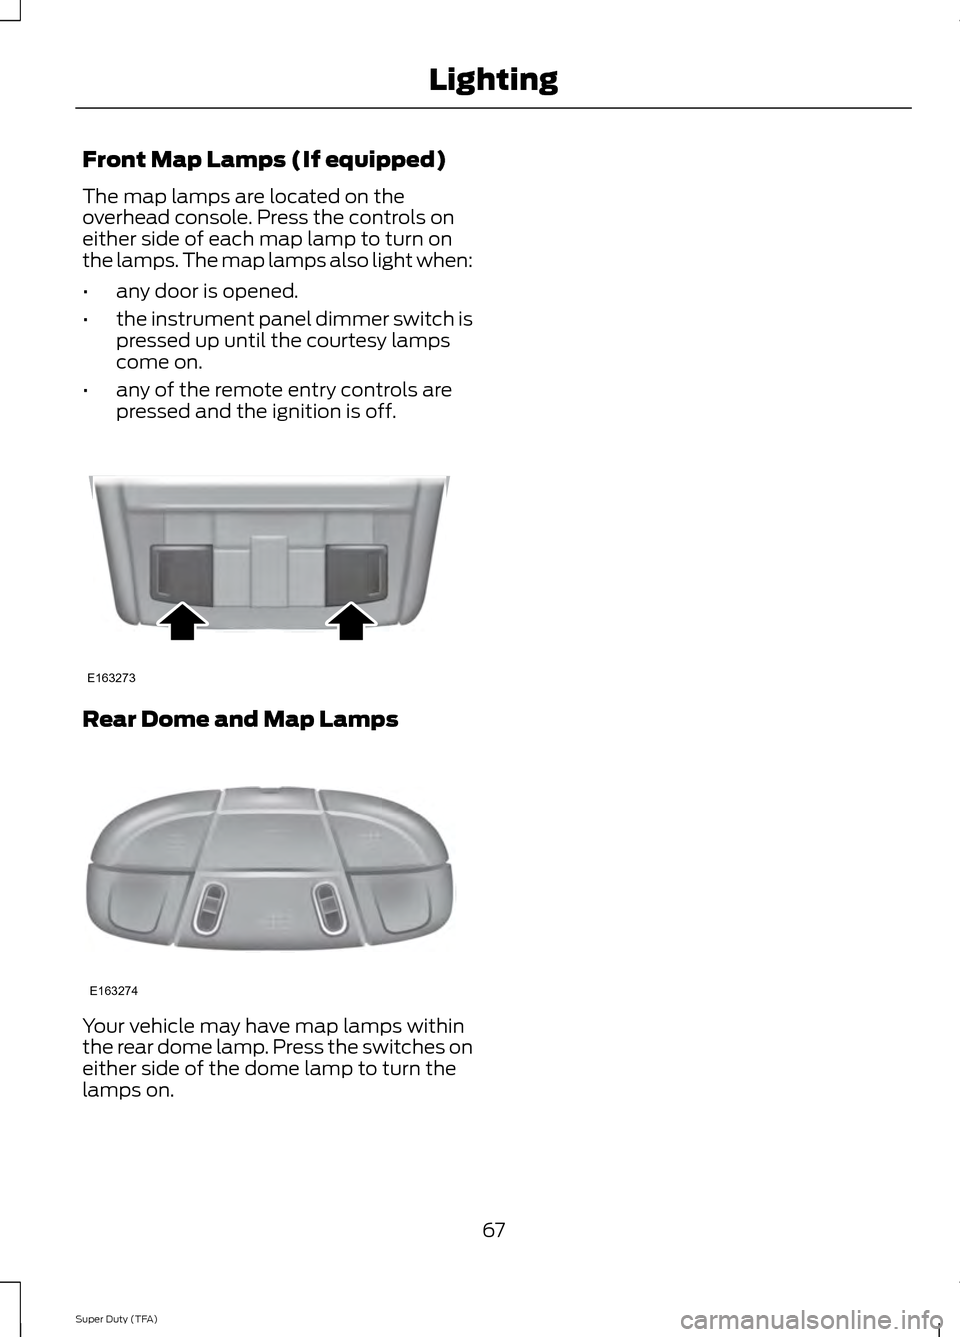 FORD SUPER DUTY 2014 3.G Owners Manual Front Map Lamps (If equipped)
The map lamps are located on the
overhead console. Press the controls on
either side of each map lamp to turn on
the lamps. The map lamps also light when:
•
any door is